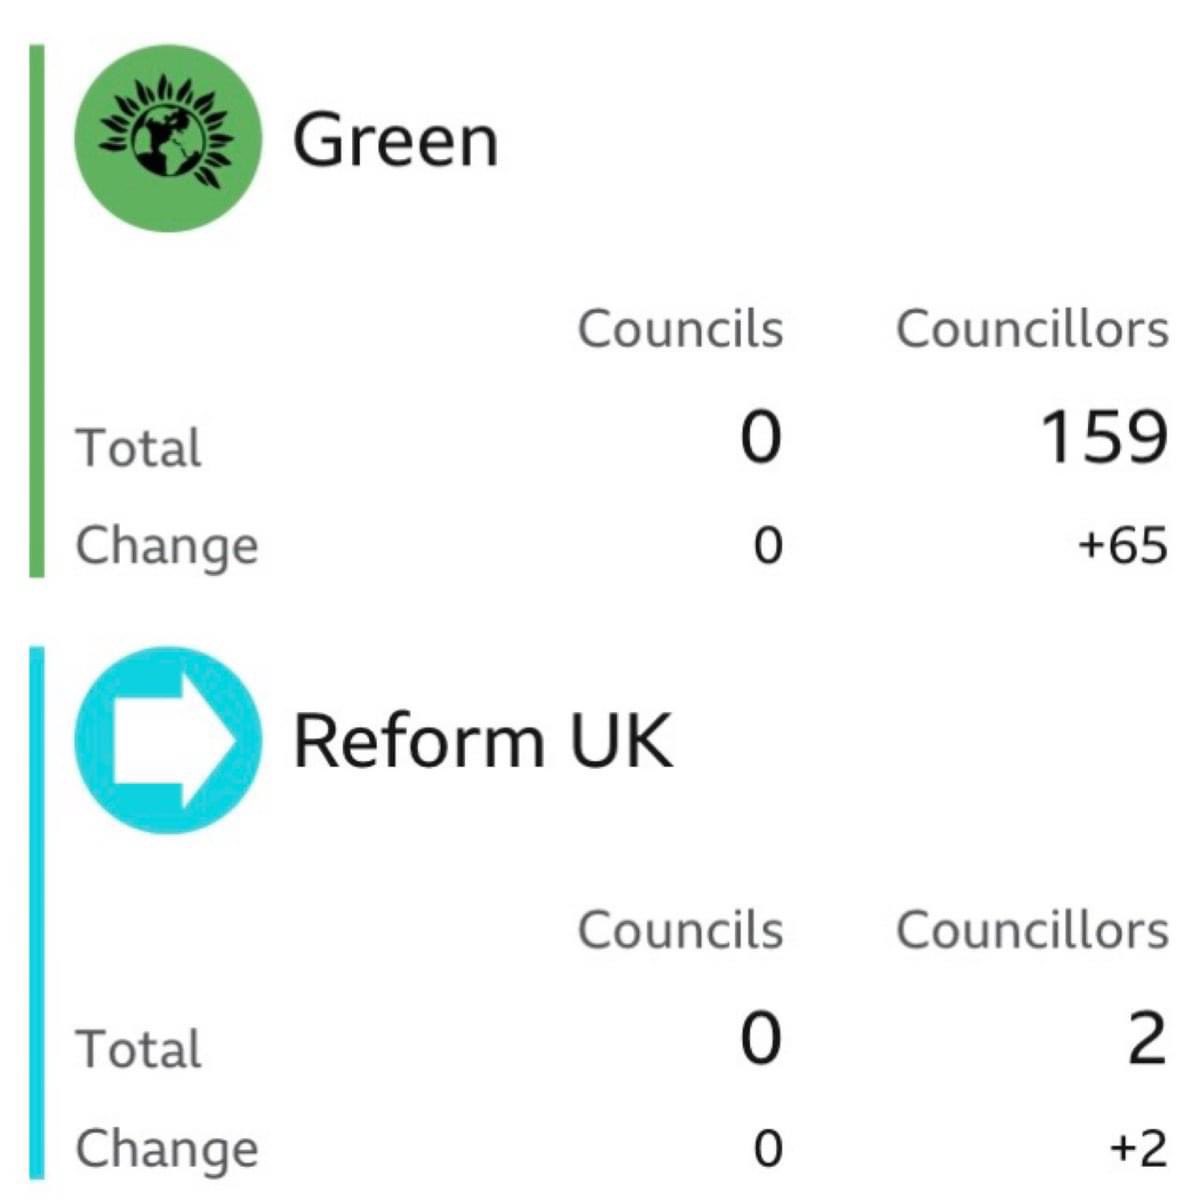 I assume this result means we will now see a representative of the Green Party on every single interview and show that the BBC do while Nigel Farage and Richard Tice will be dumped in the bin forever.